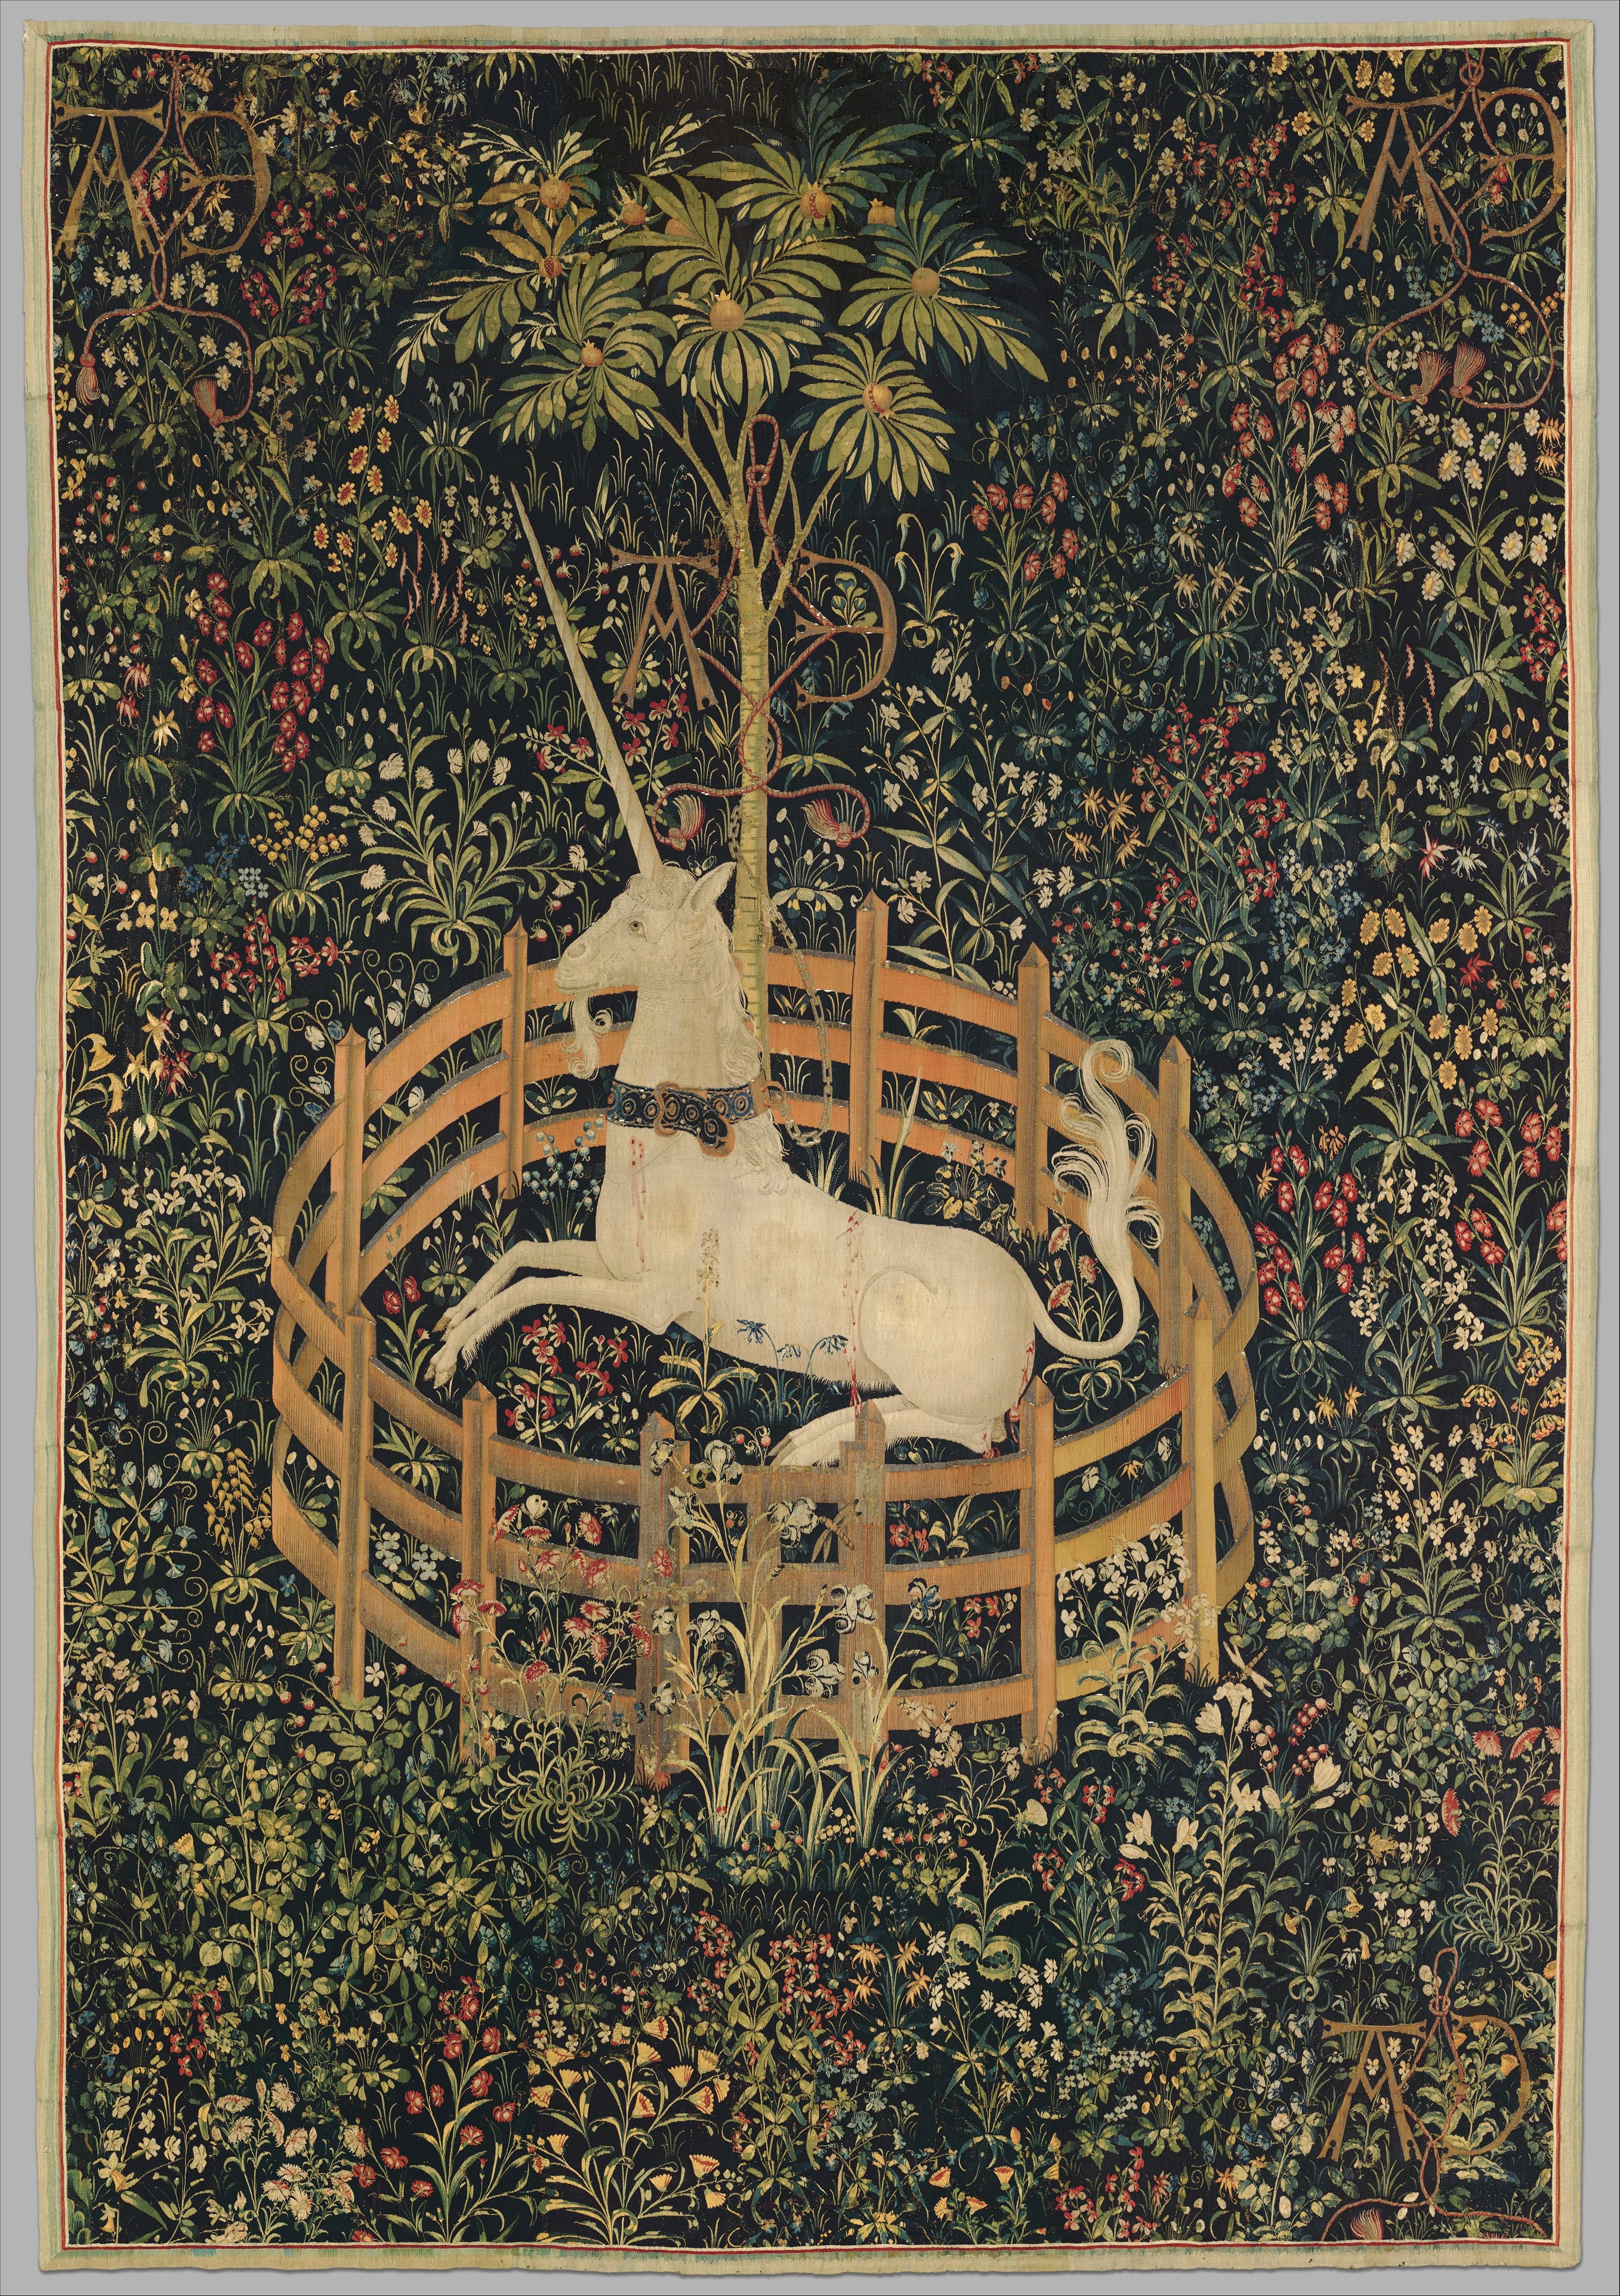 A painting of a white unicorn sitting on flowery grass, surrounded by a circular fence